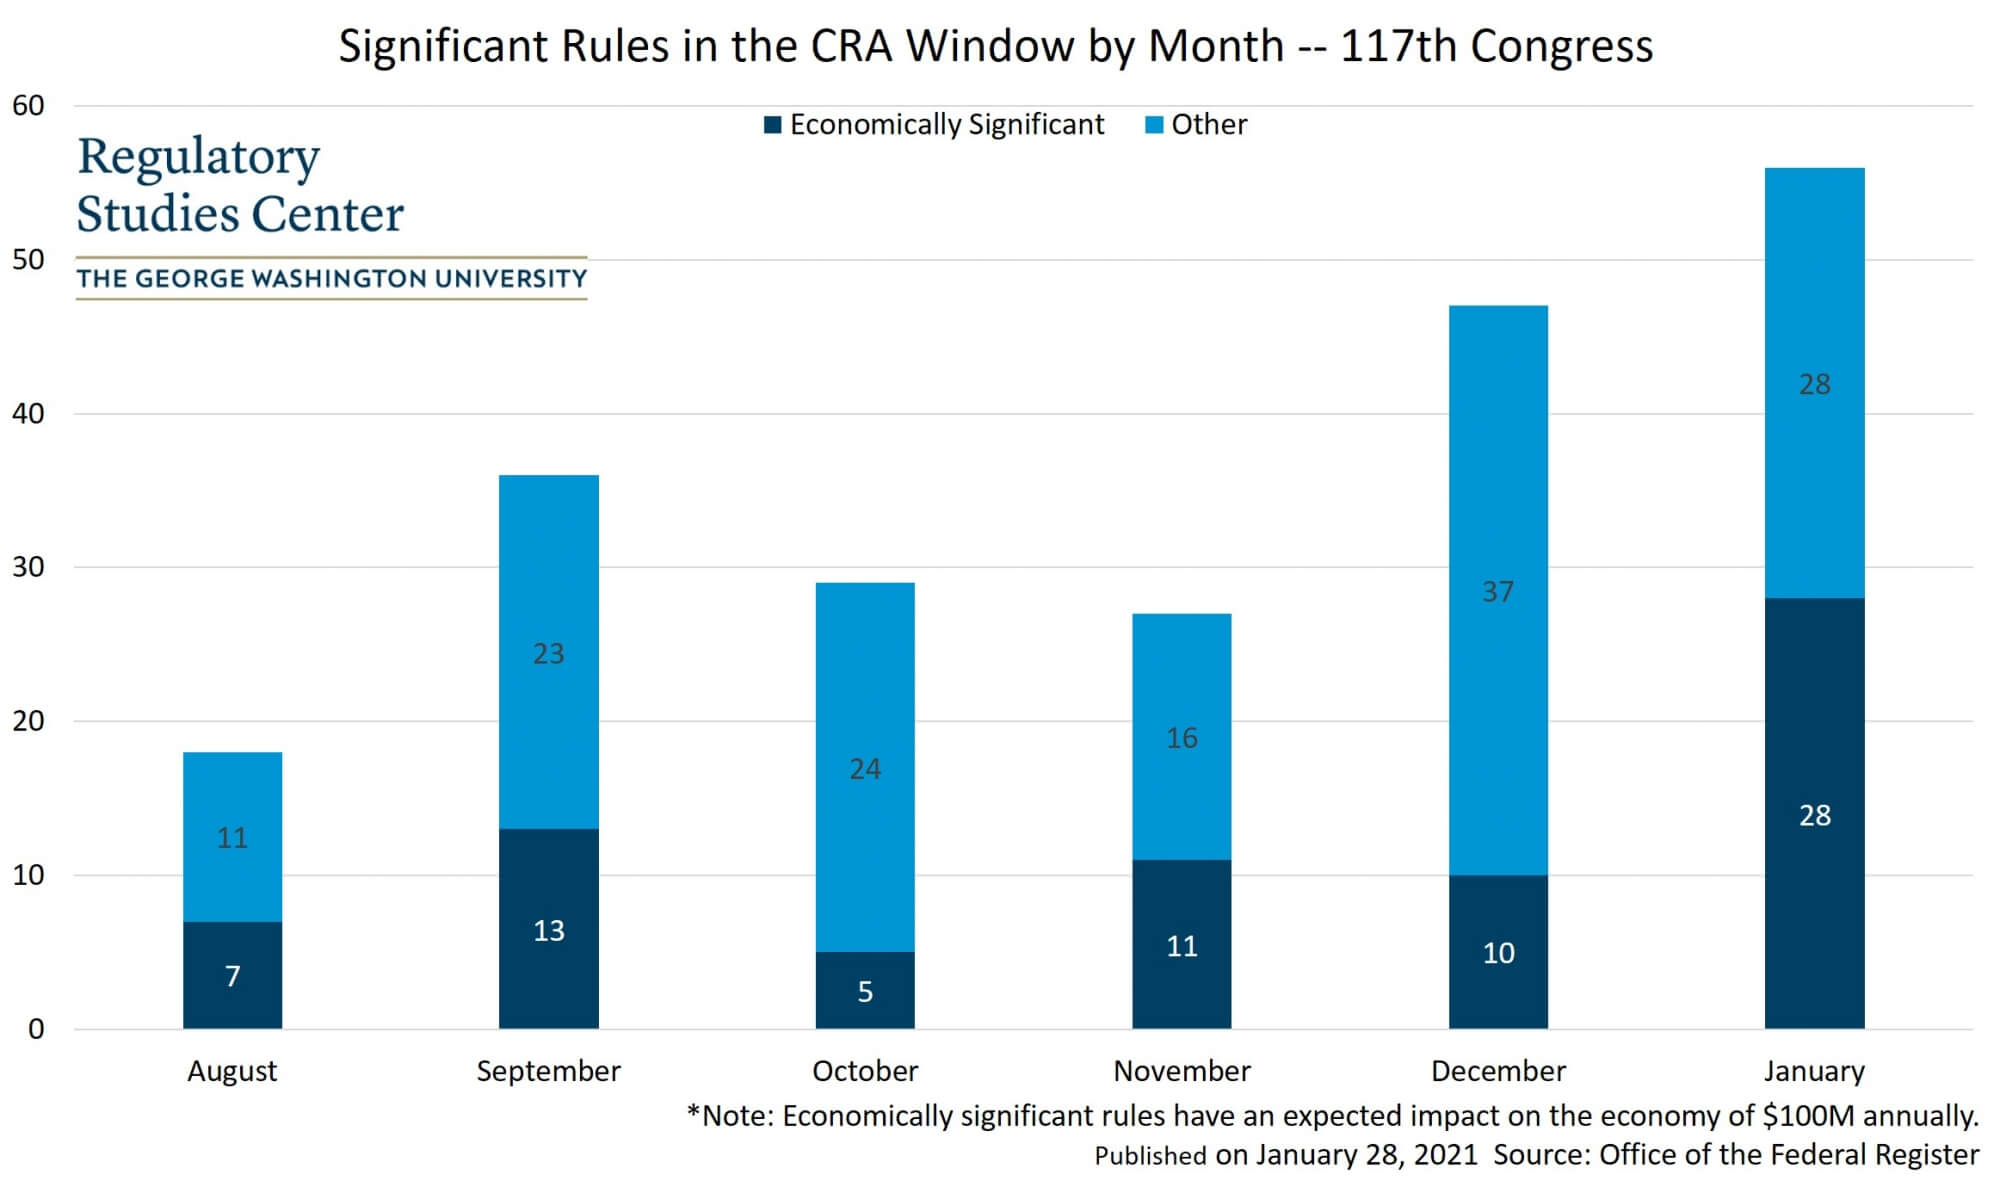 Bar chart depicting the number of significant rules in the CRA window published by month.